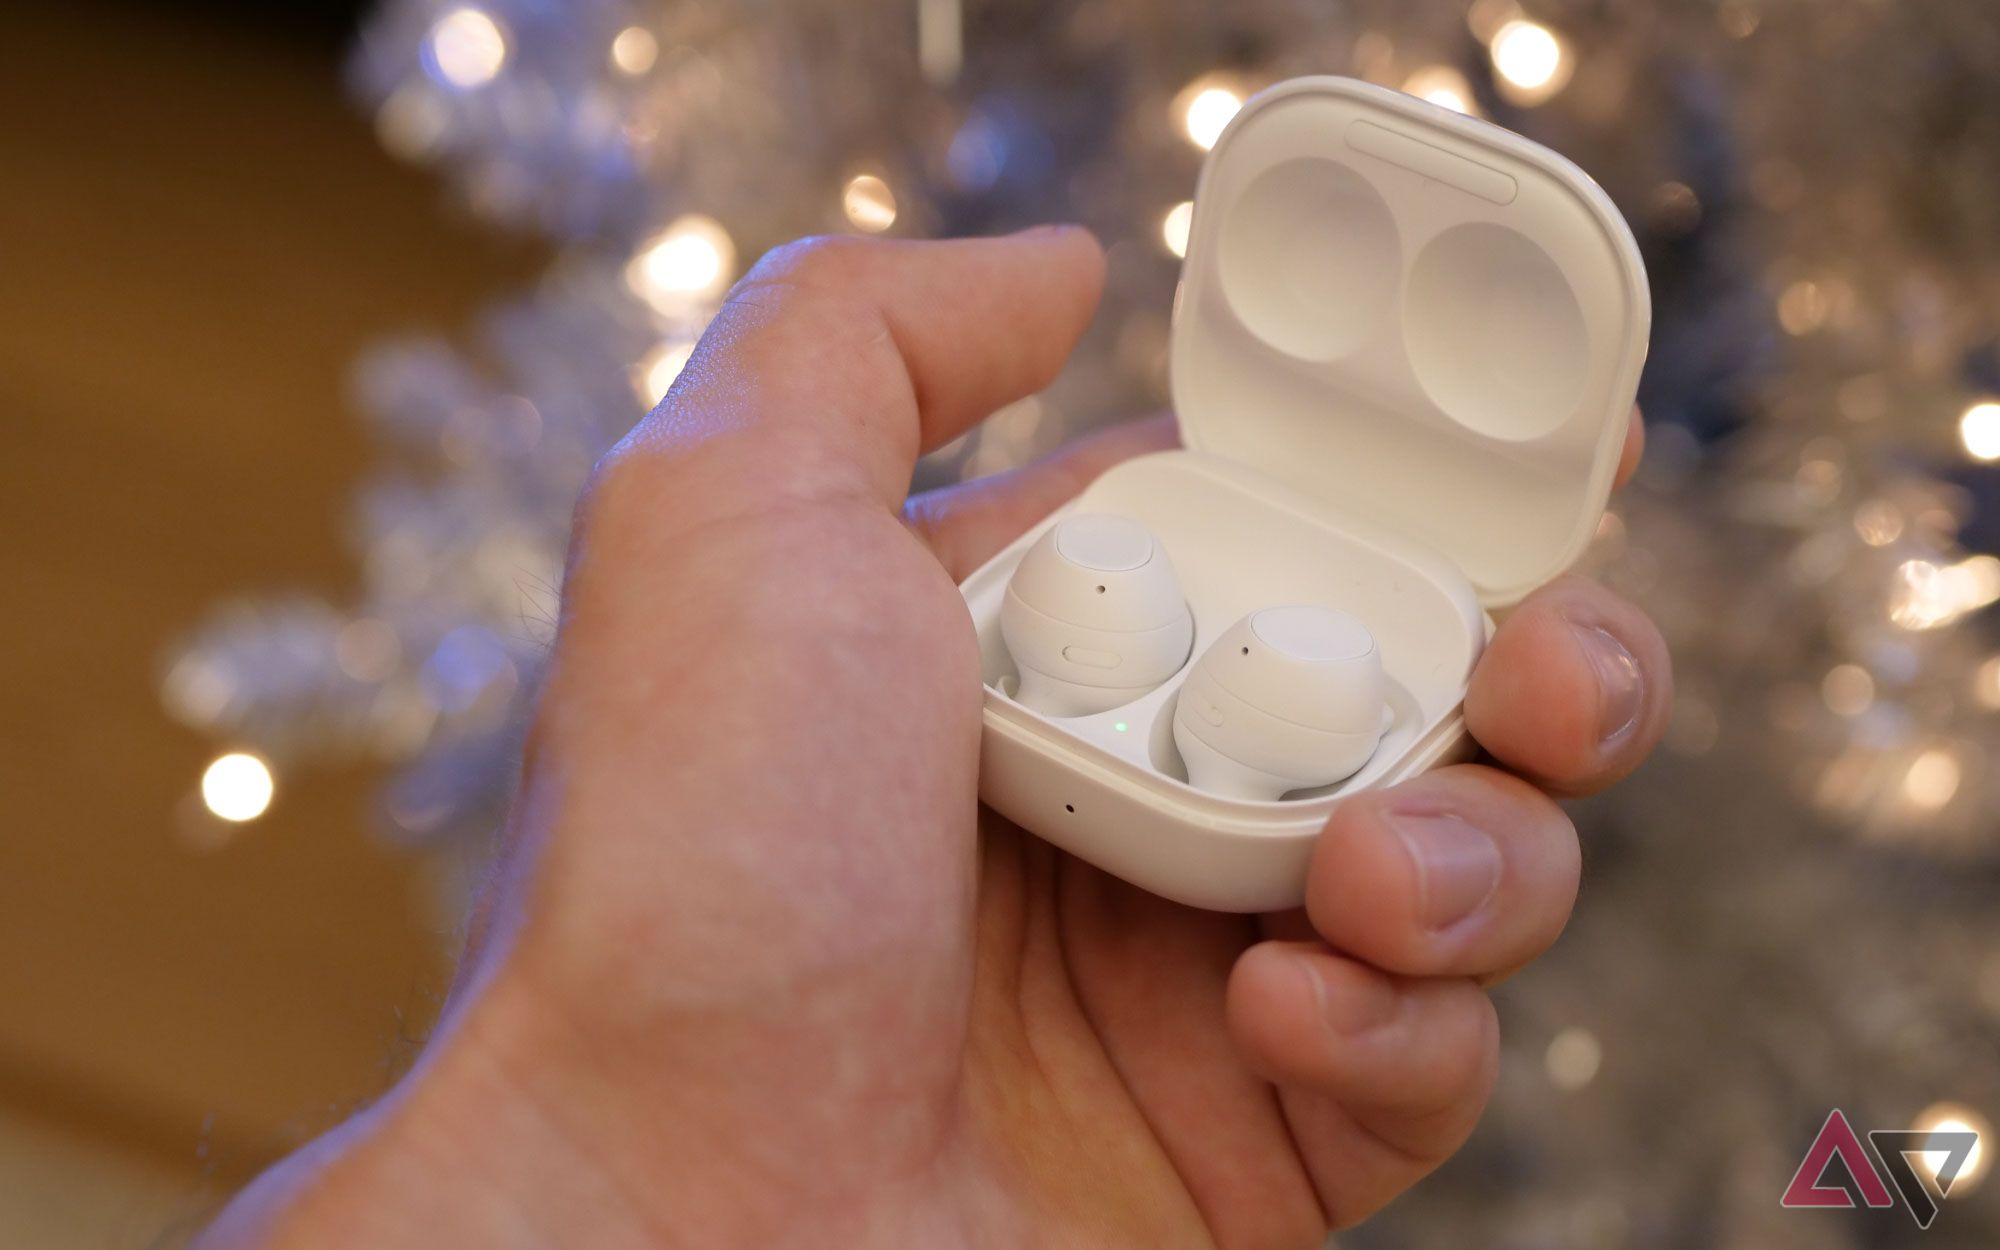 Do the Samsung Galaxy Buds FE have wireless charging?